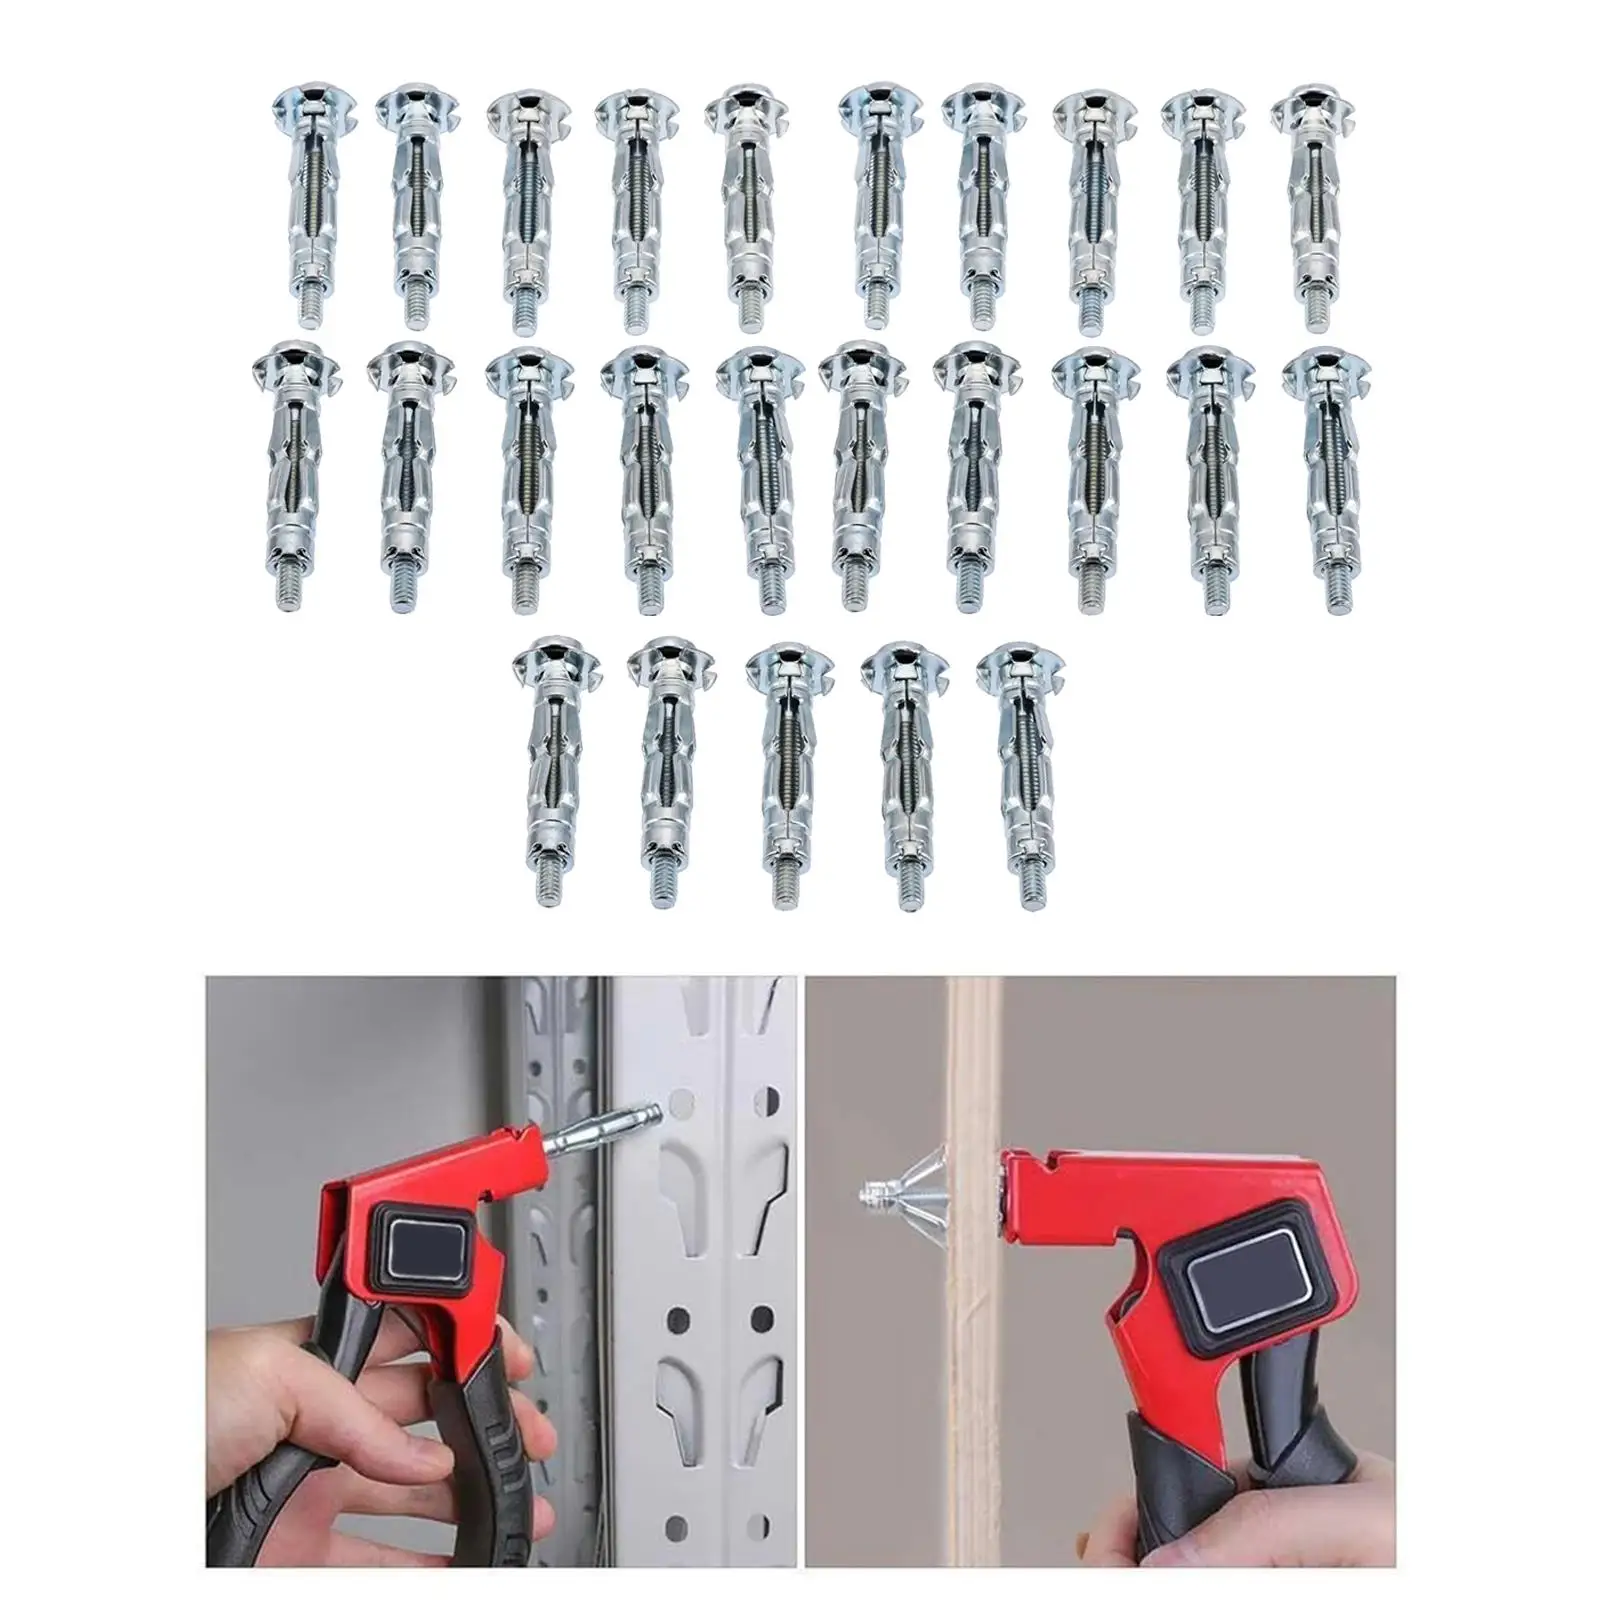 25 Pieces Carbon Steel Hollow Wall Anchors Metal Plasterboard Cavity Wall Fixings Anchors Plugs Plaster Anchors for Plaster Tile